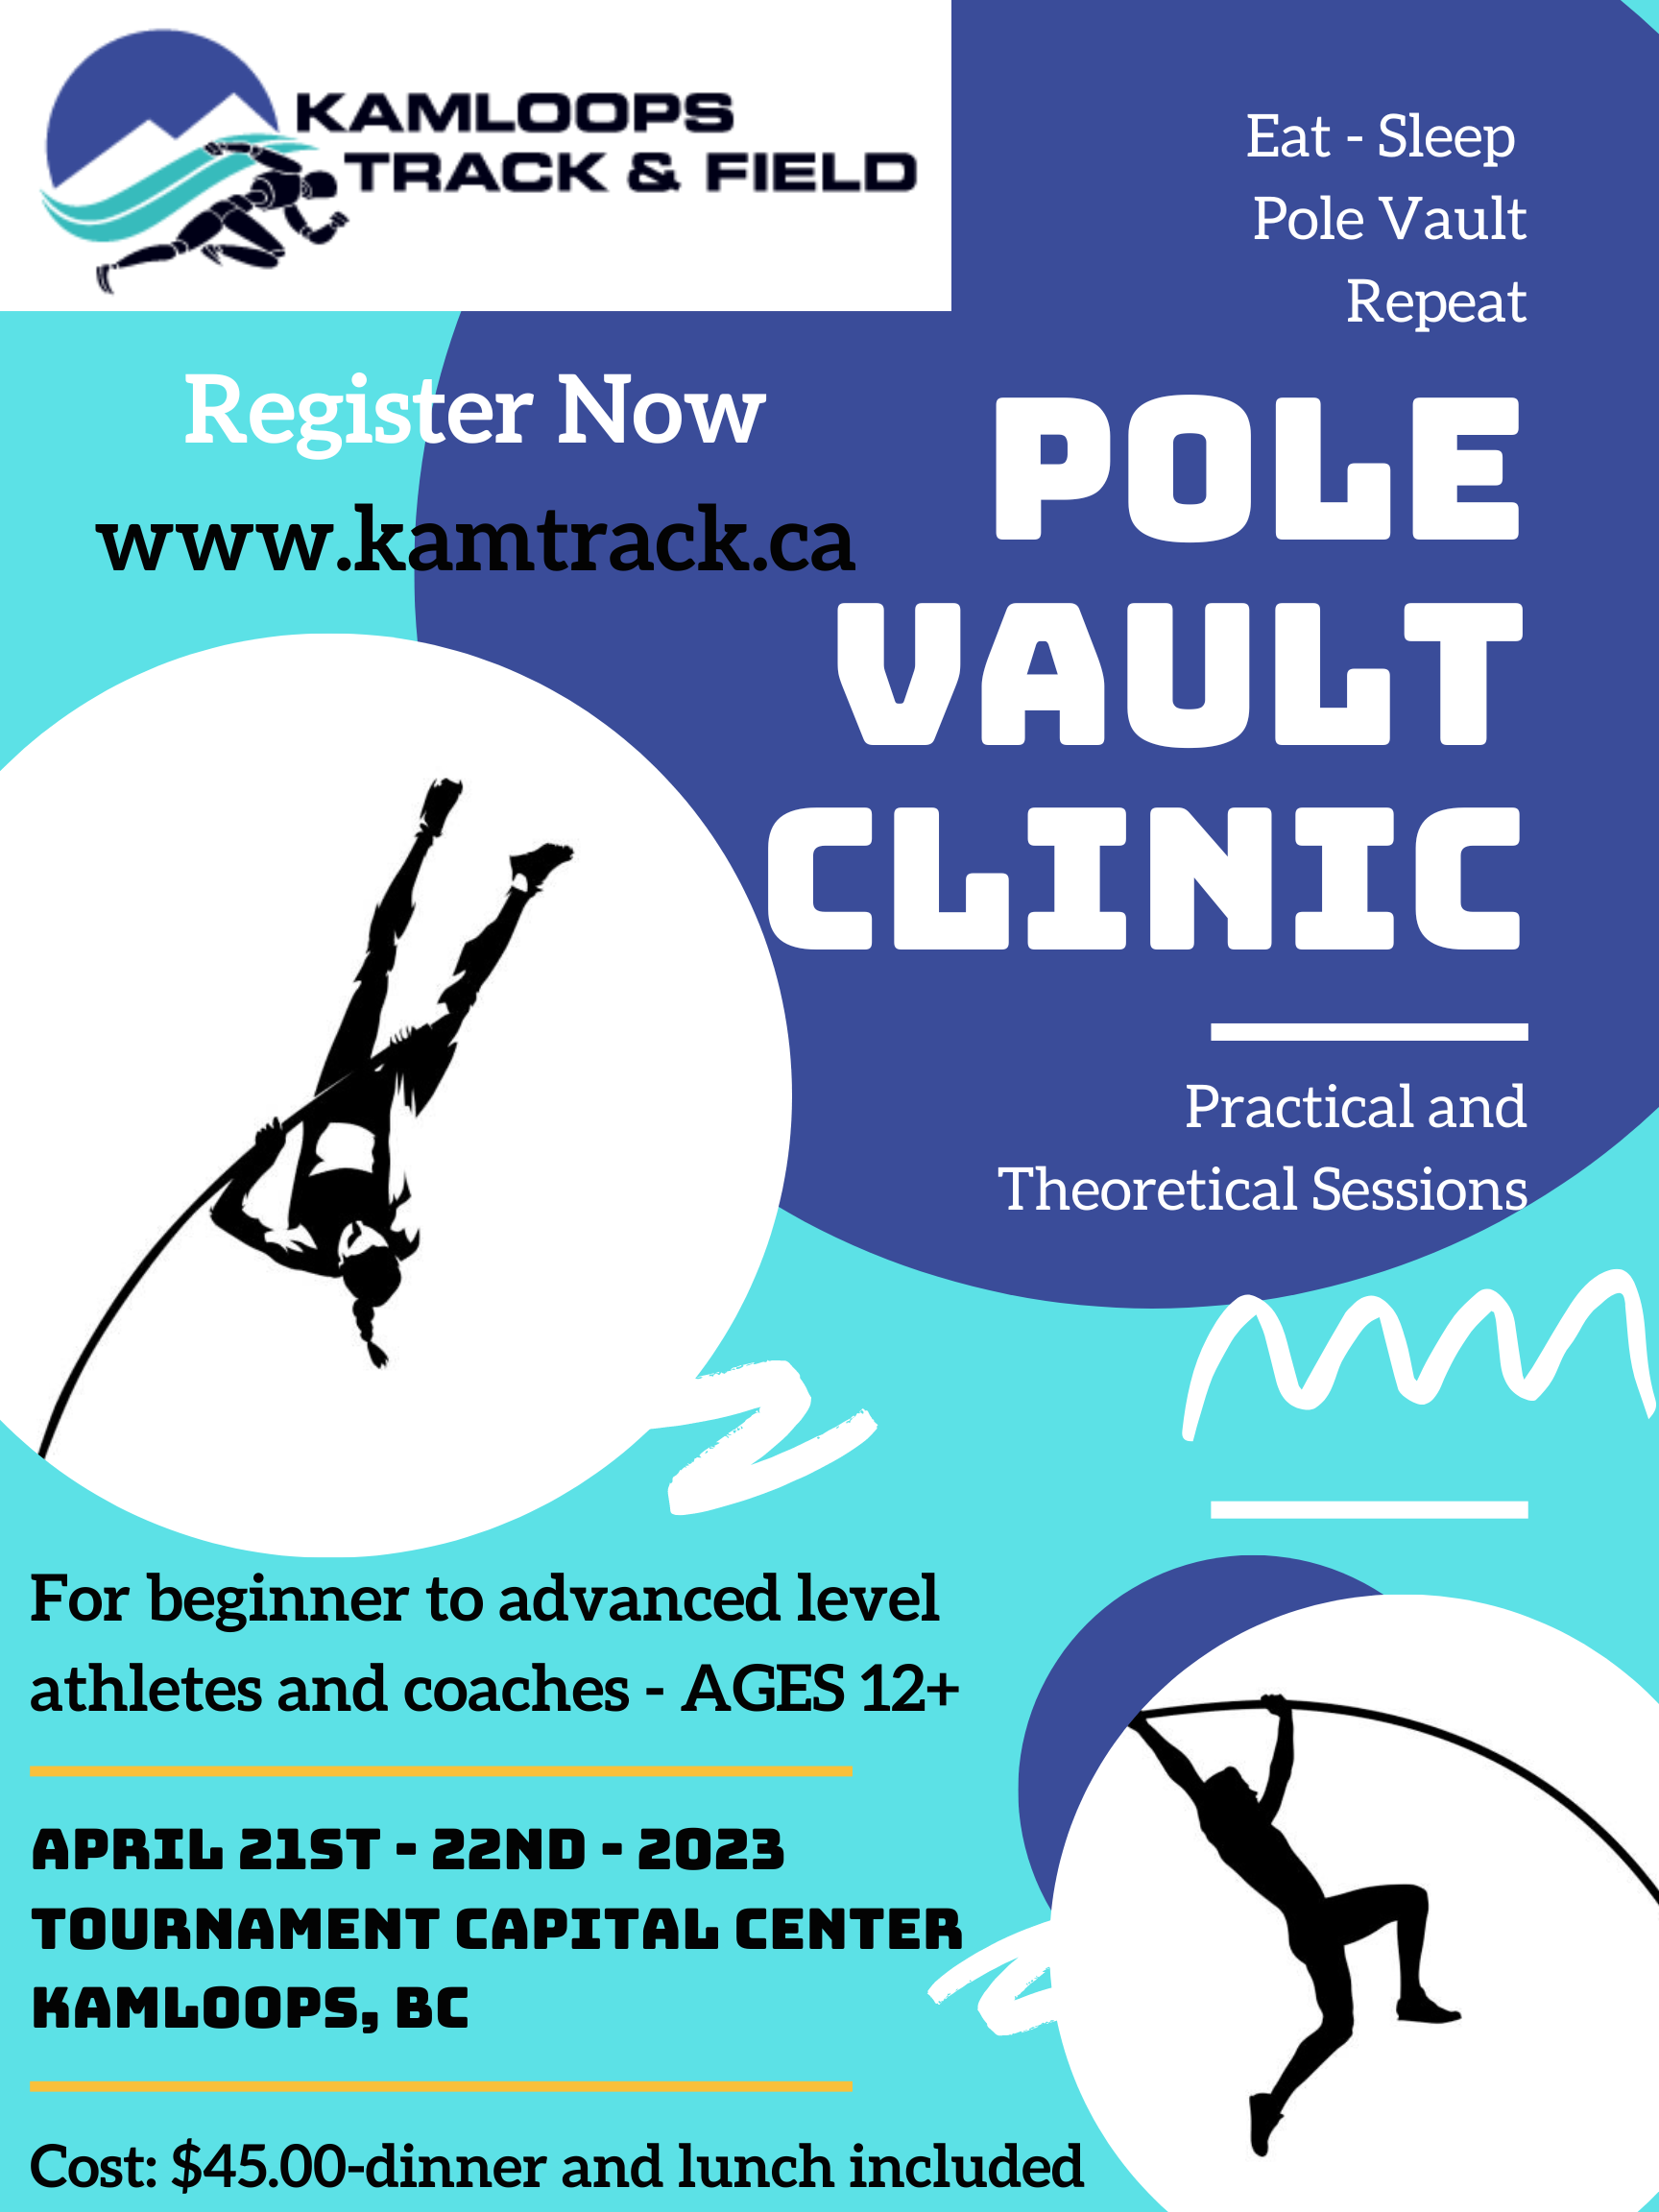 2023 Kamloops Track and Field Pole Vault Clinic